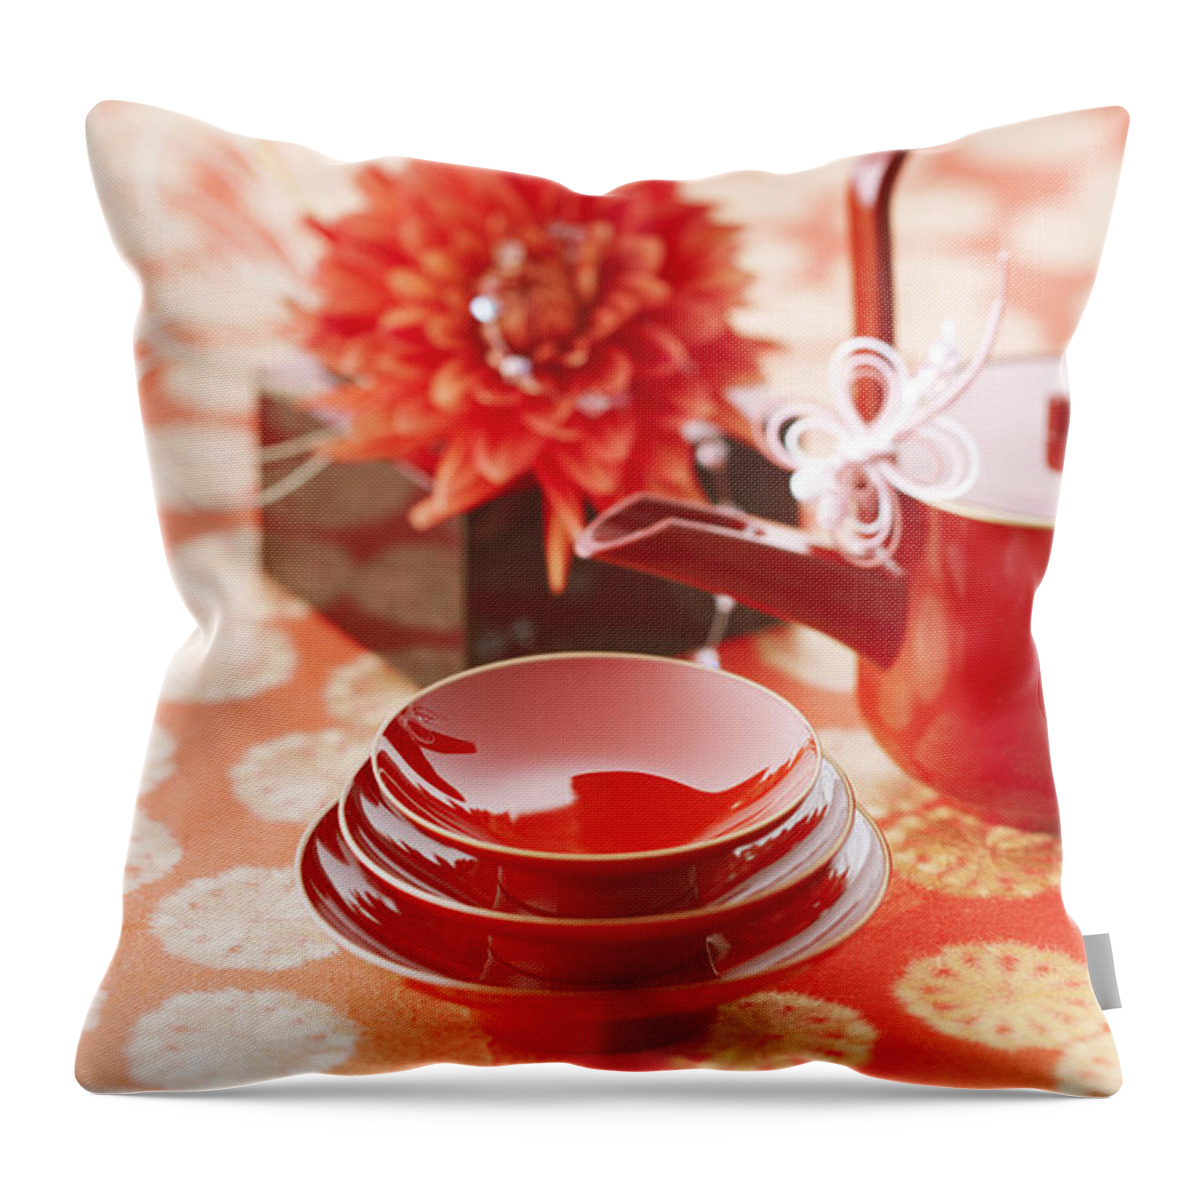 Still Life Throw Pillow featuring the photograph Still Life by Jackie Russo